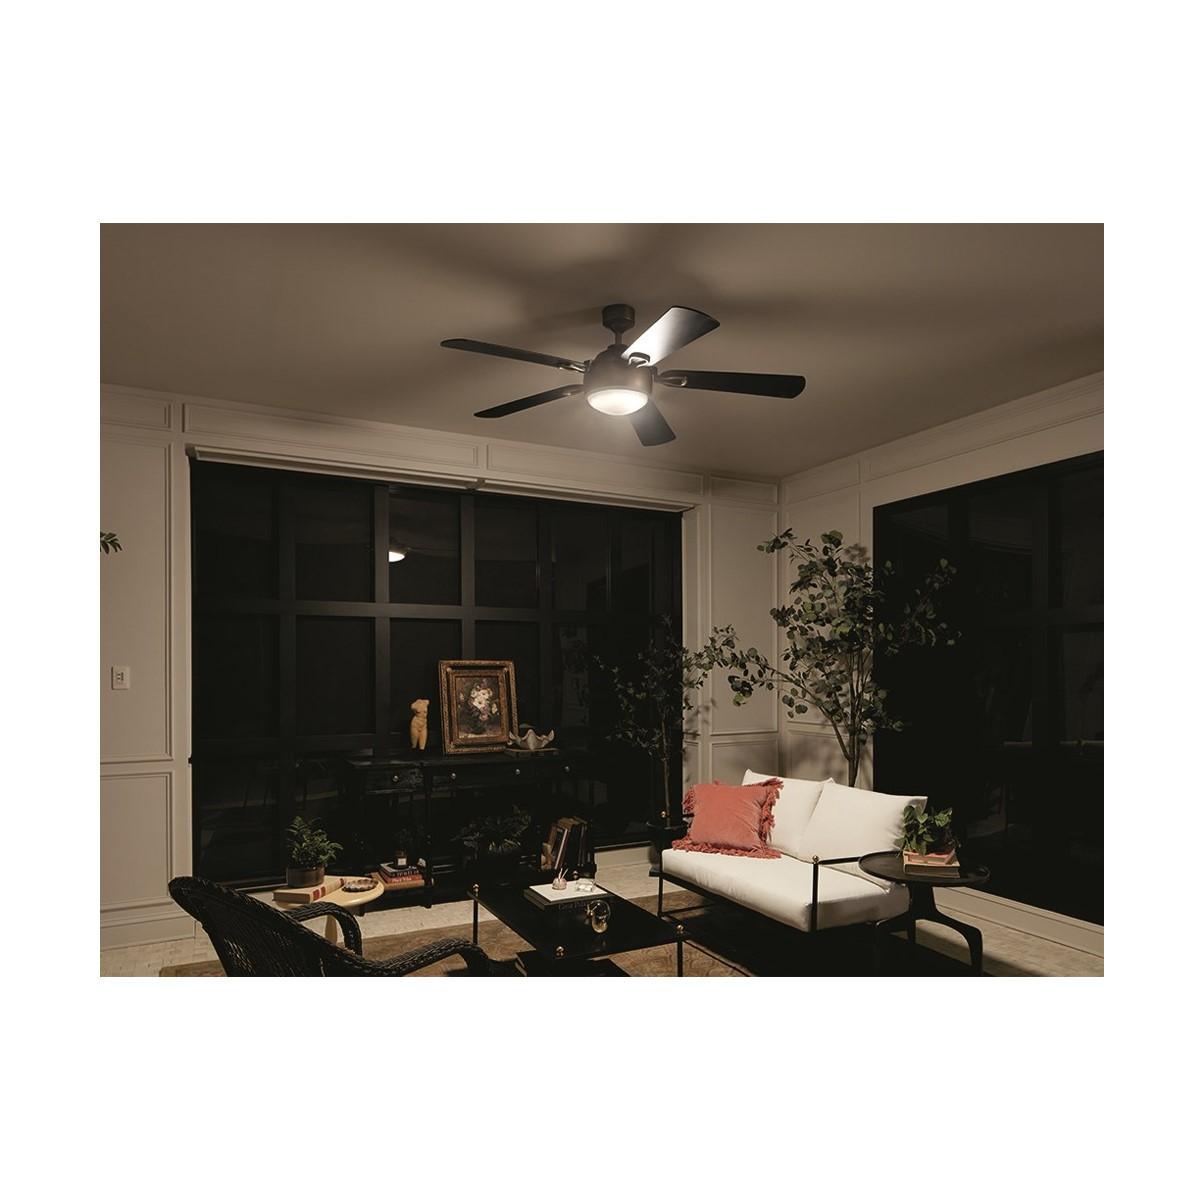 Humble 60 Inch Ceiling Fan With Light, Wall Control Included - Bees Lighting